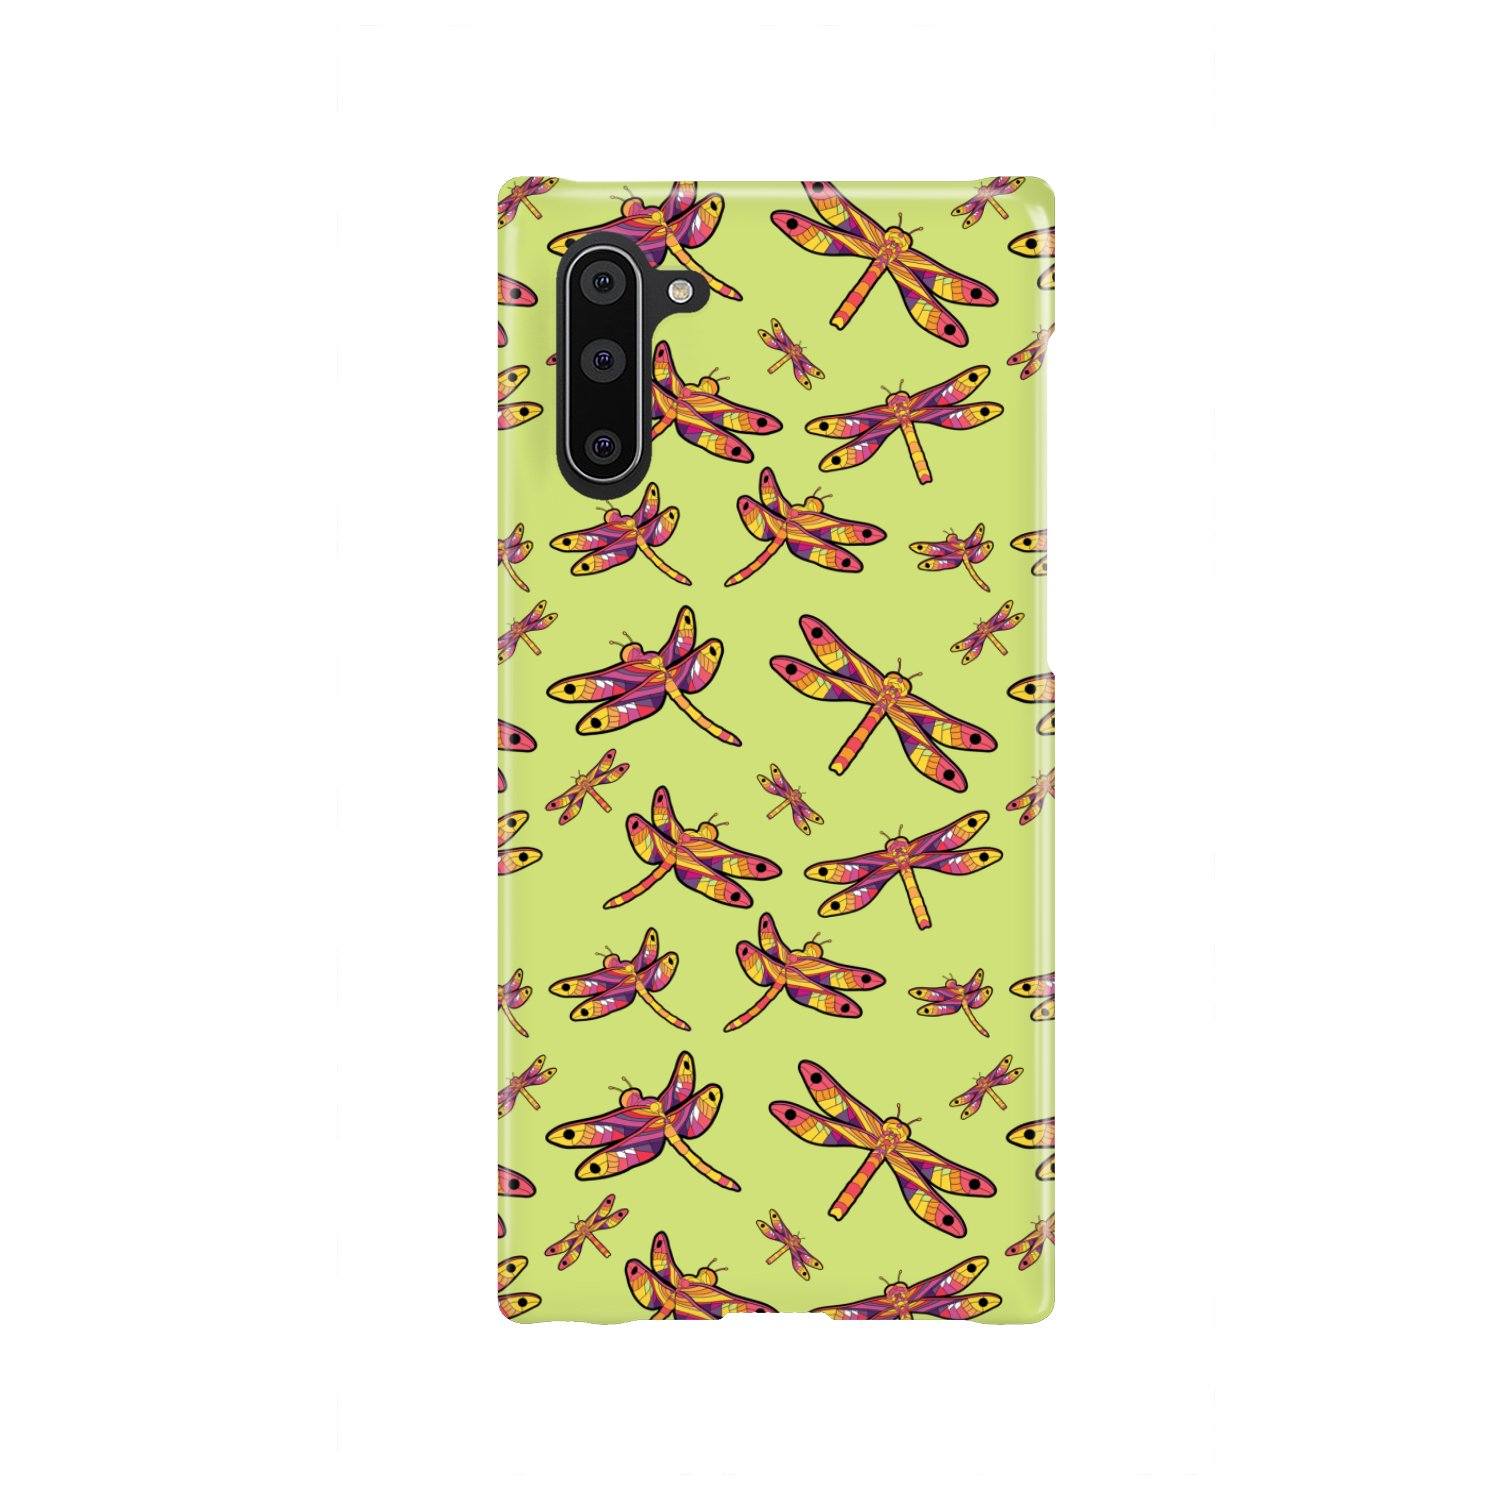 Gathering Lime Phone Case Phone Case wc-fulfillment Samsung Galaxy Note 10 